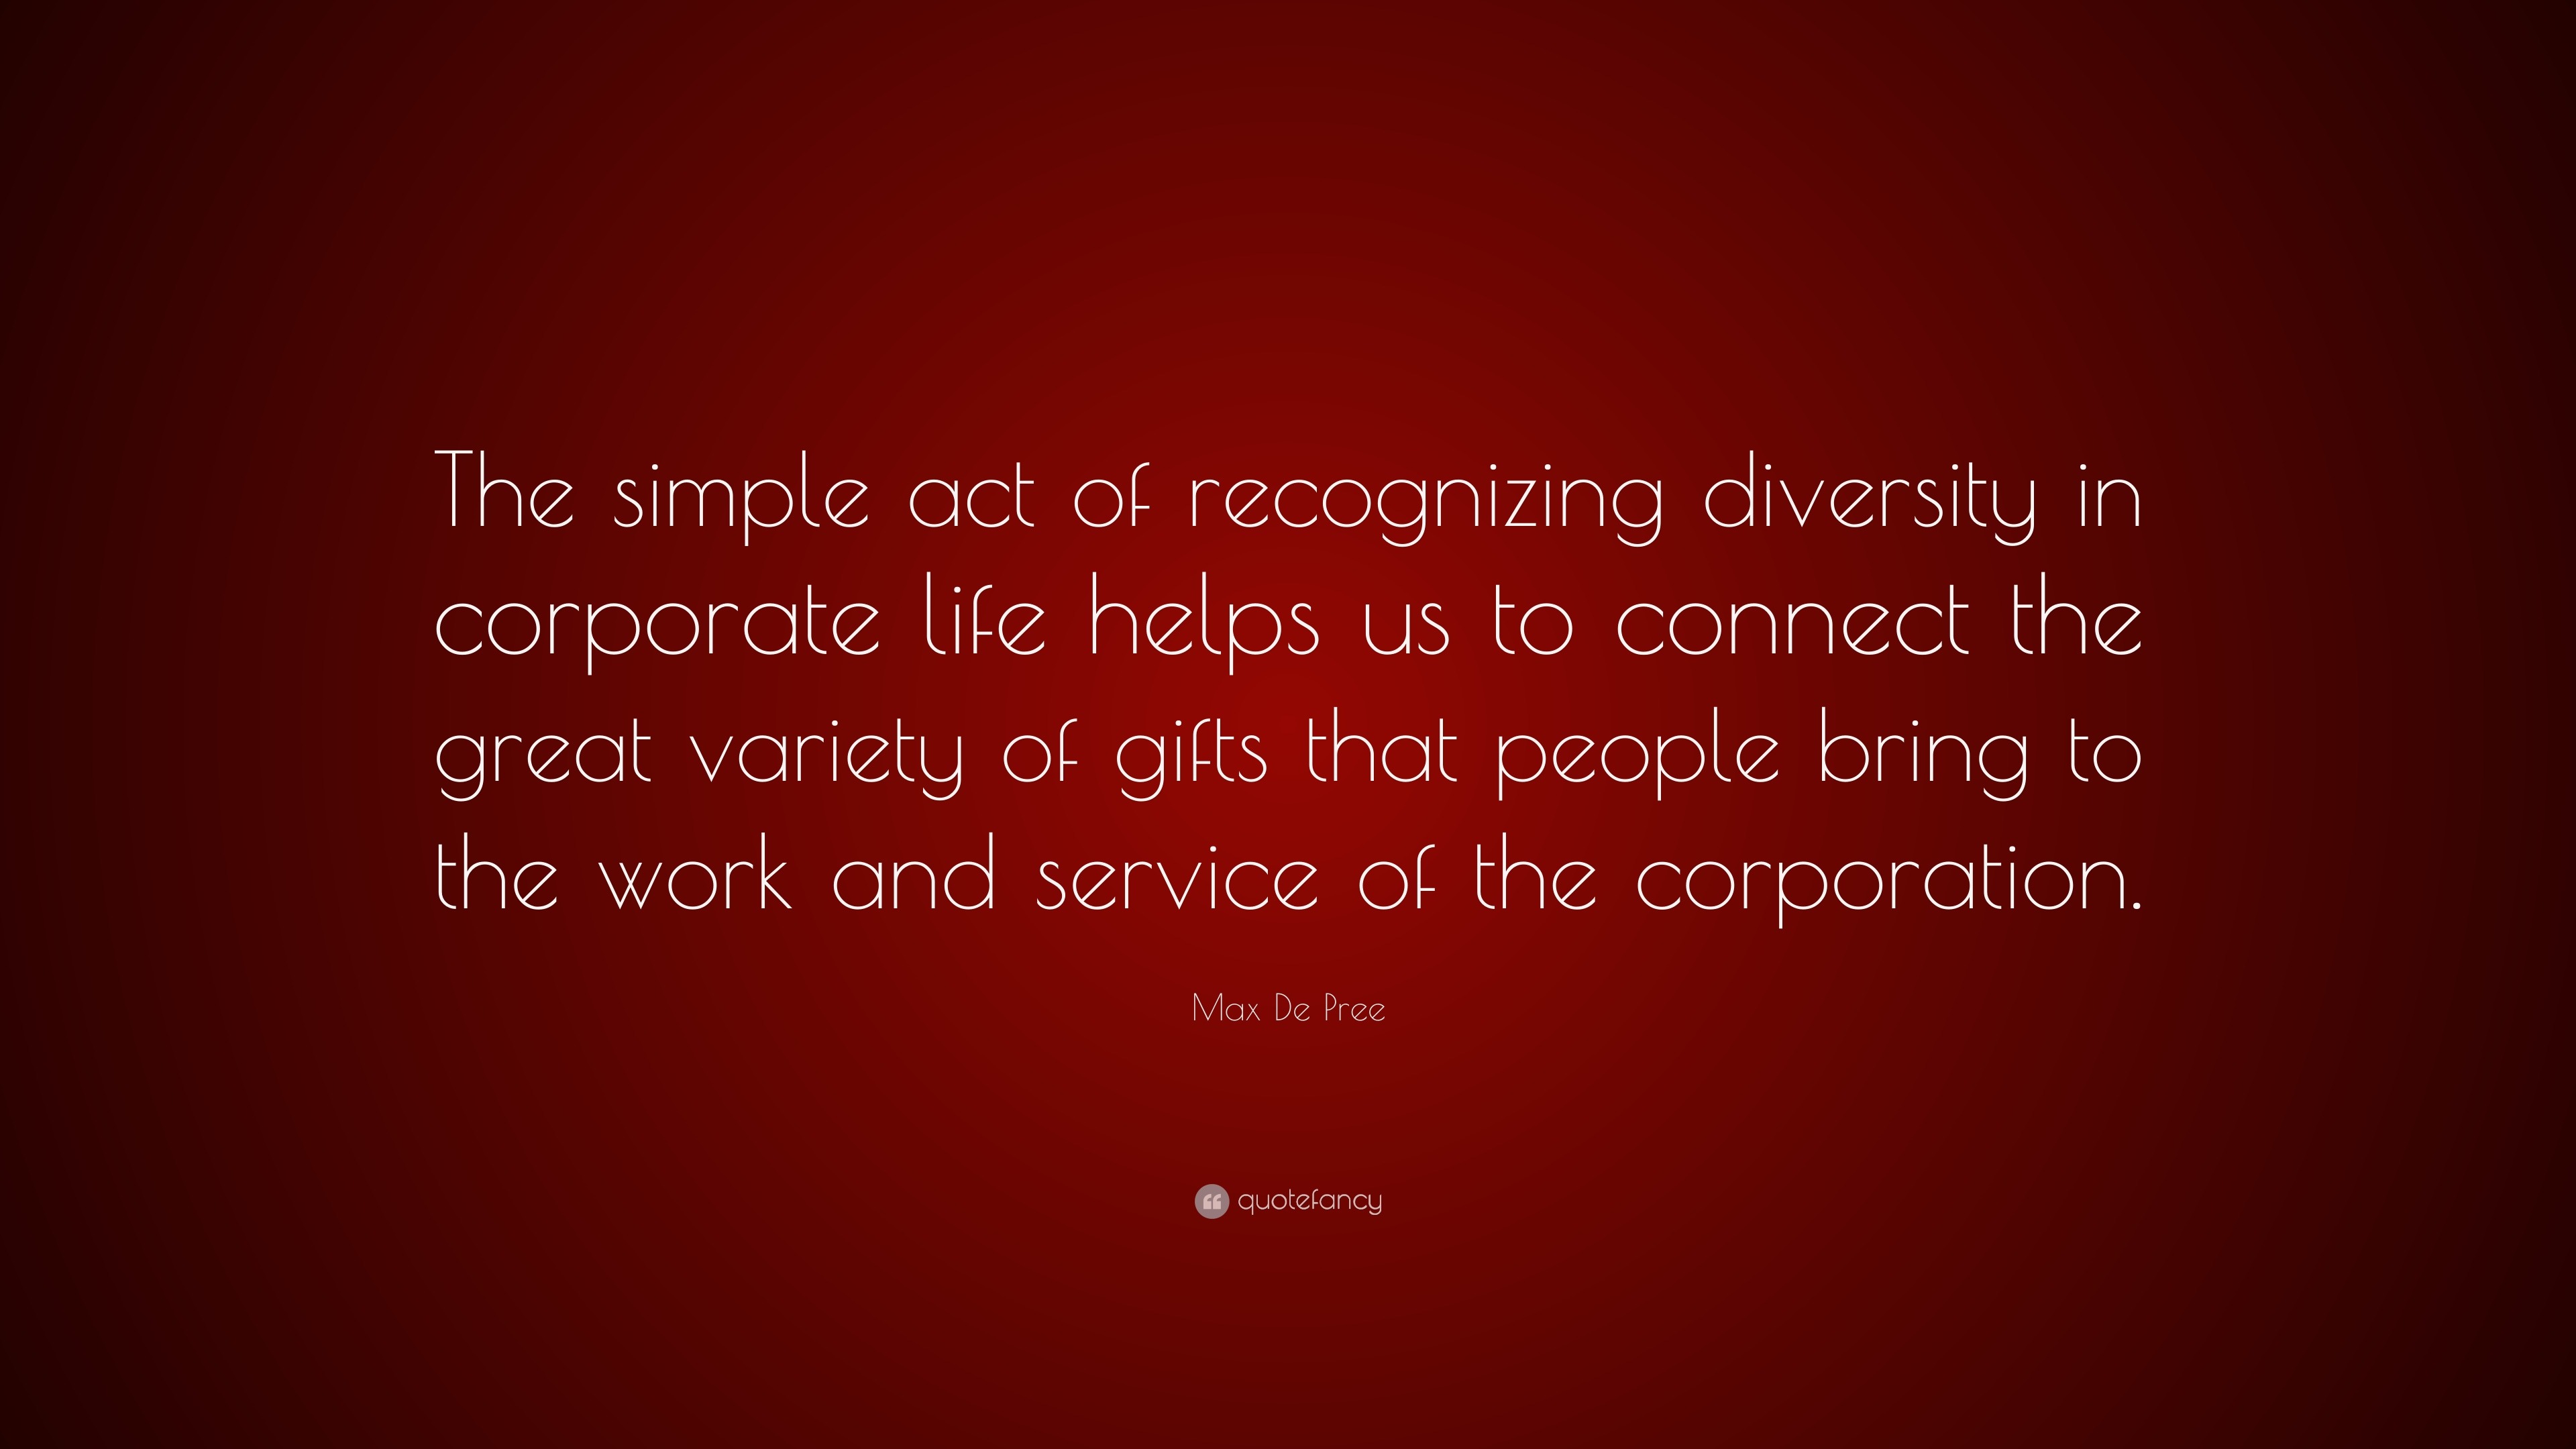 Max De Pree Quote: “The simple act of recognizing diversity in ...